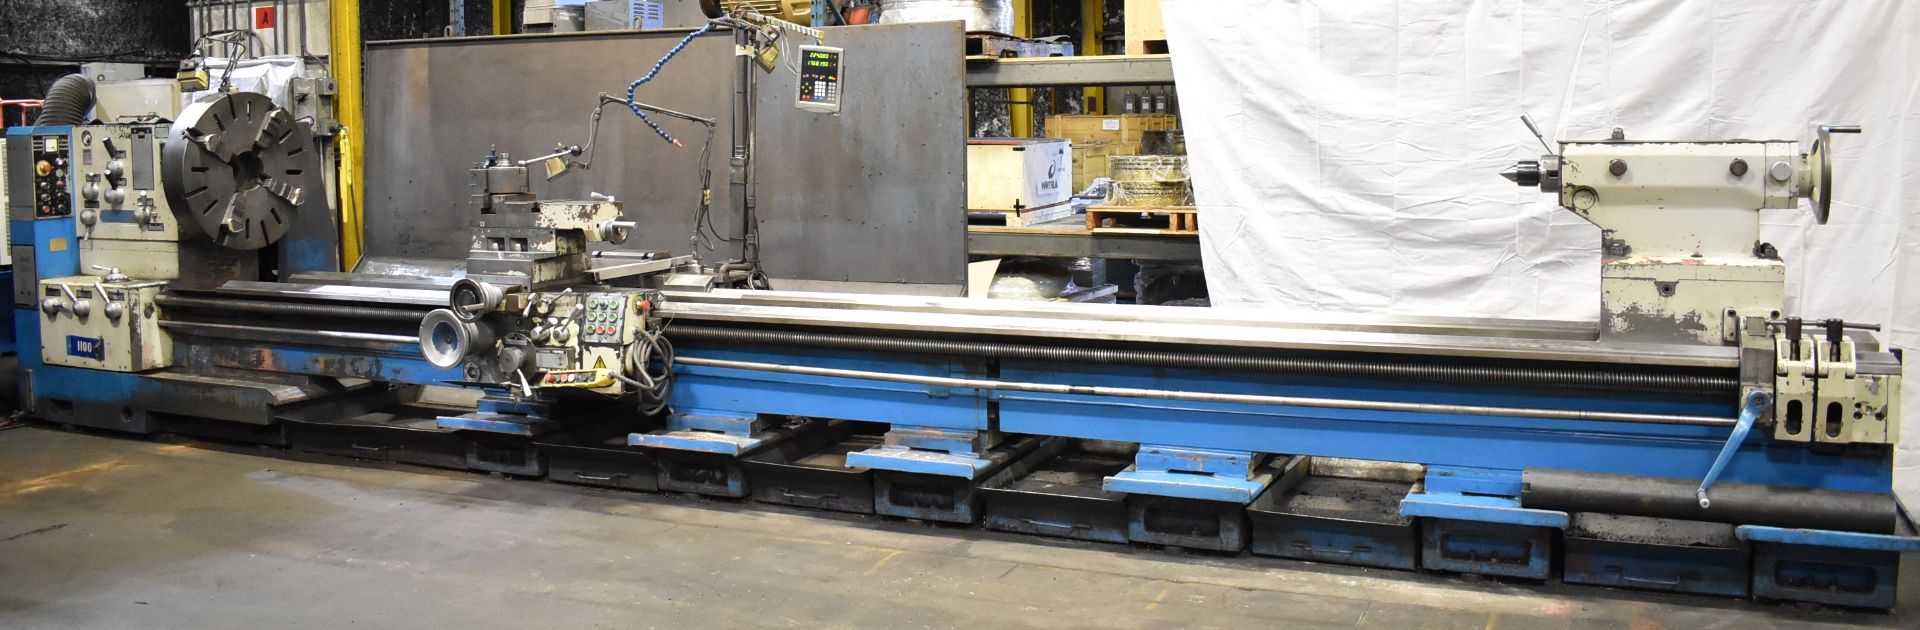 POREBA TPK 110X6 GAP BED ENGINE LATHE WITH 44" SWING OVER BED, 250" BETWEEN CENTERS, 4" SPINDLE